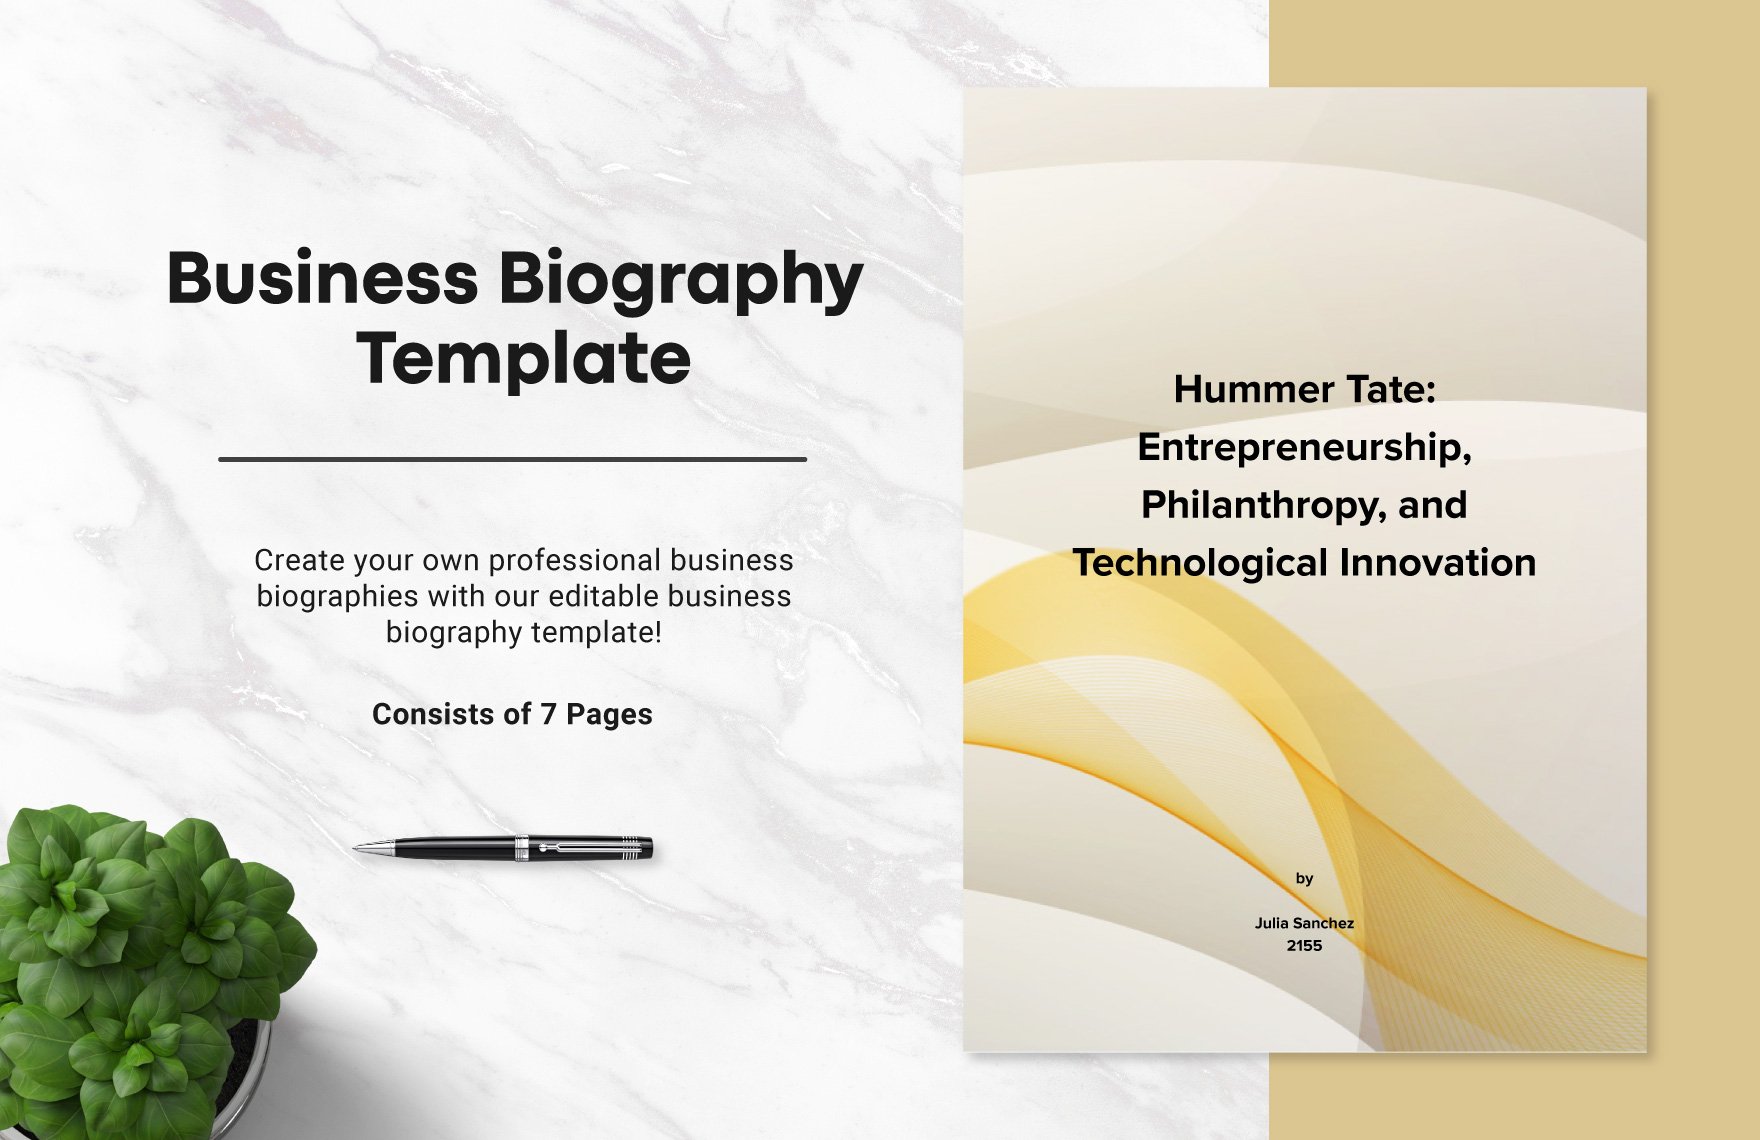 Business Biography Template